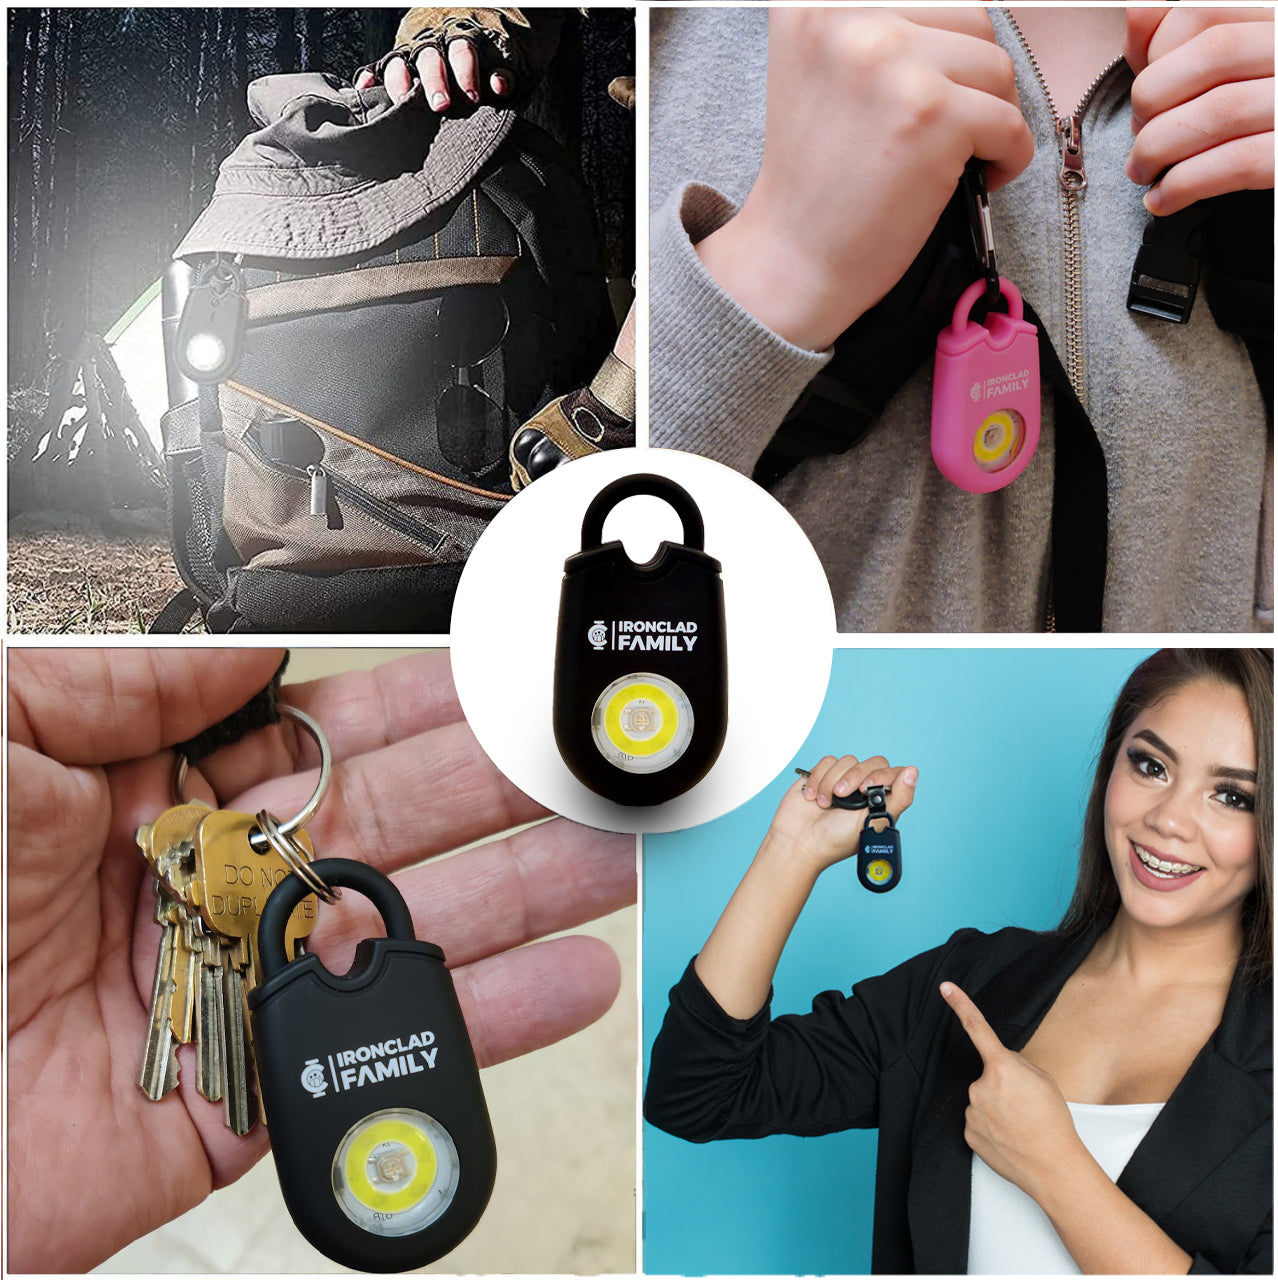 Collection of images showcasing different views of the personal alarm sound pendant keychain